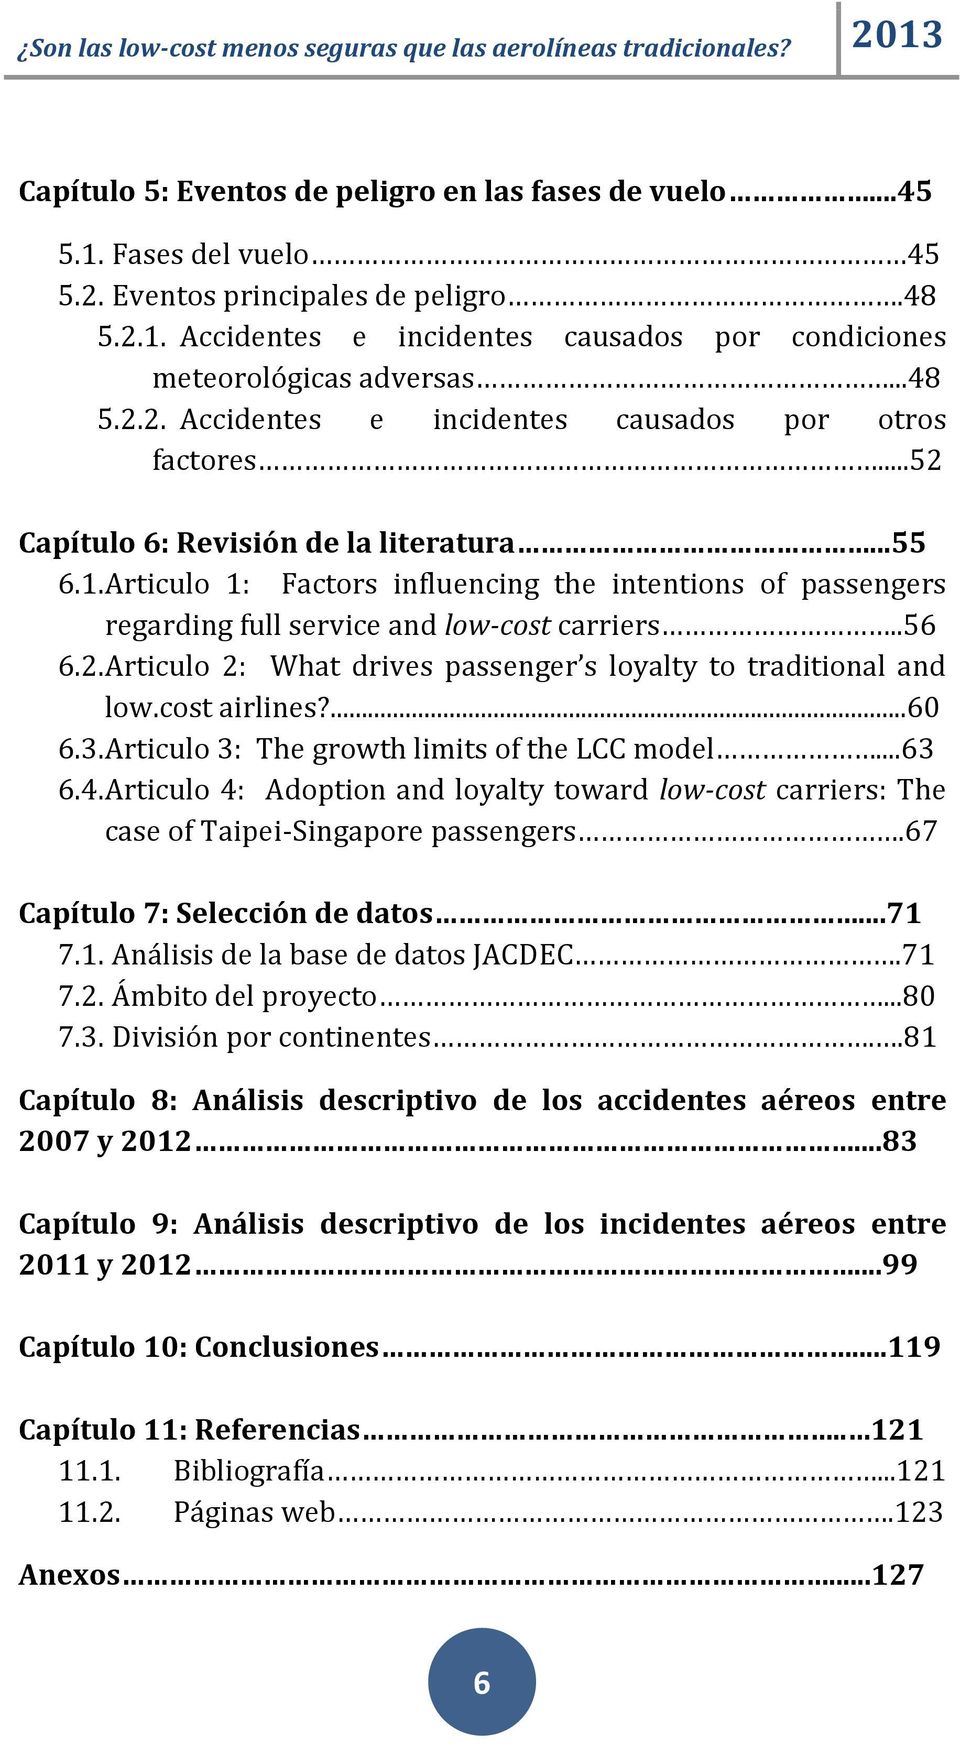 Articulo 1: Factors influencing the intentions of passengers regarding full service and low-cost carriers..56 6.2. Articulo 2: What drives passenger s loyalty to traditional and low.cost airlines?